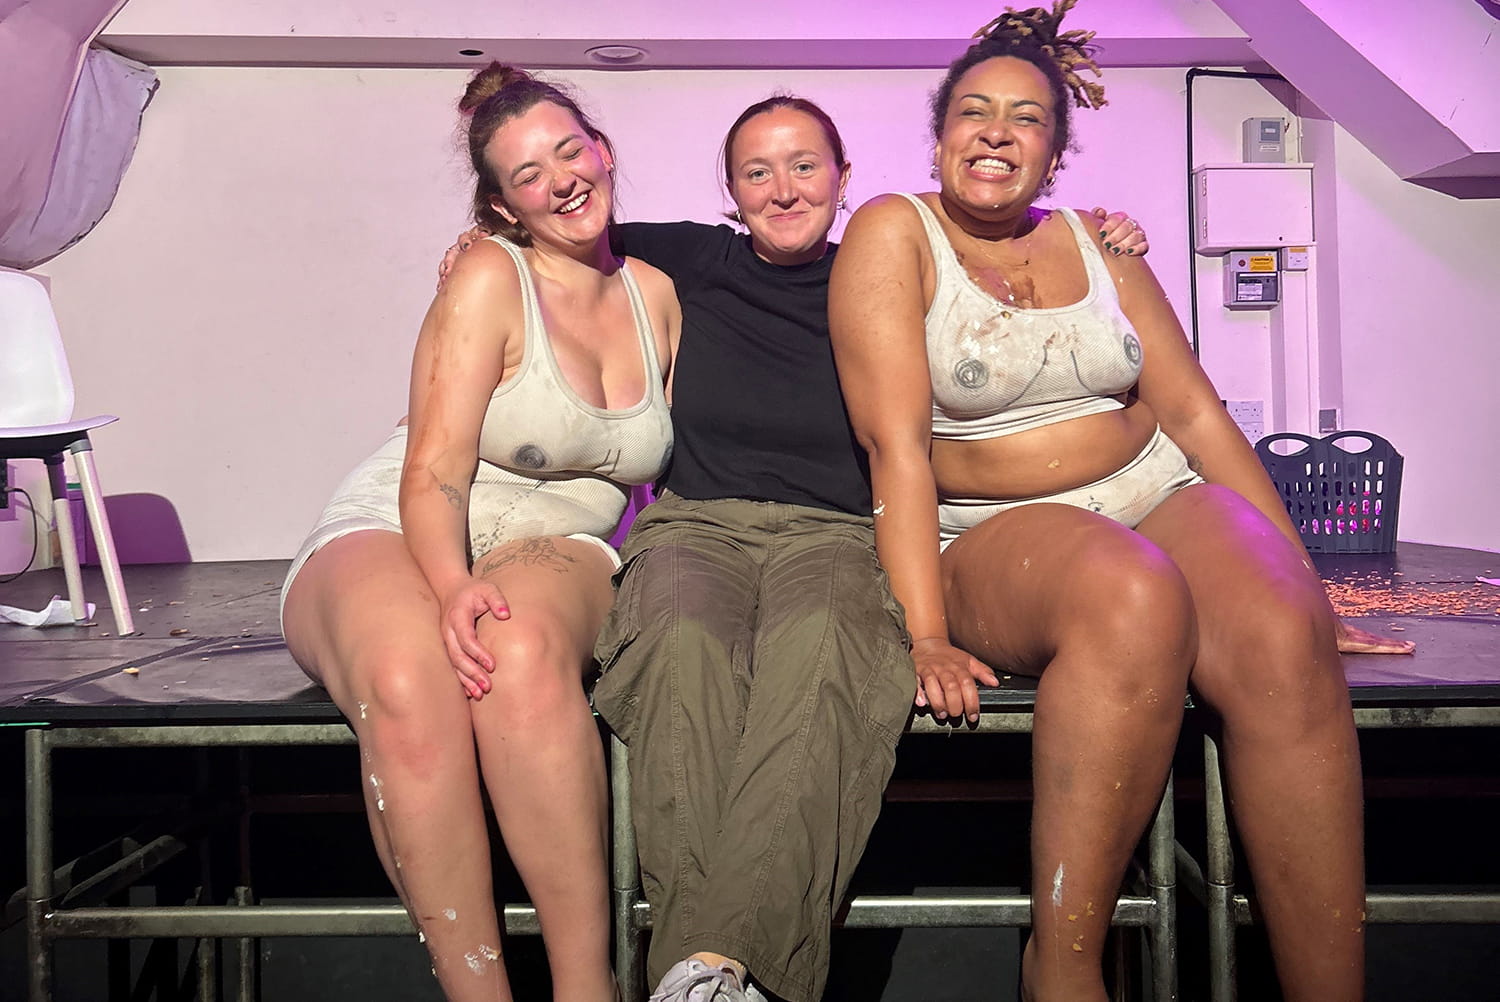 Rio, Amy and Katja of Succulent Theatre sit on a stage hugging together.